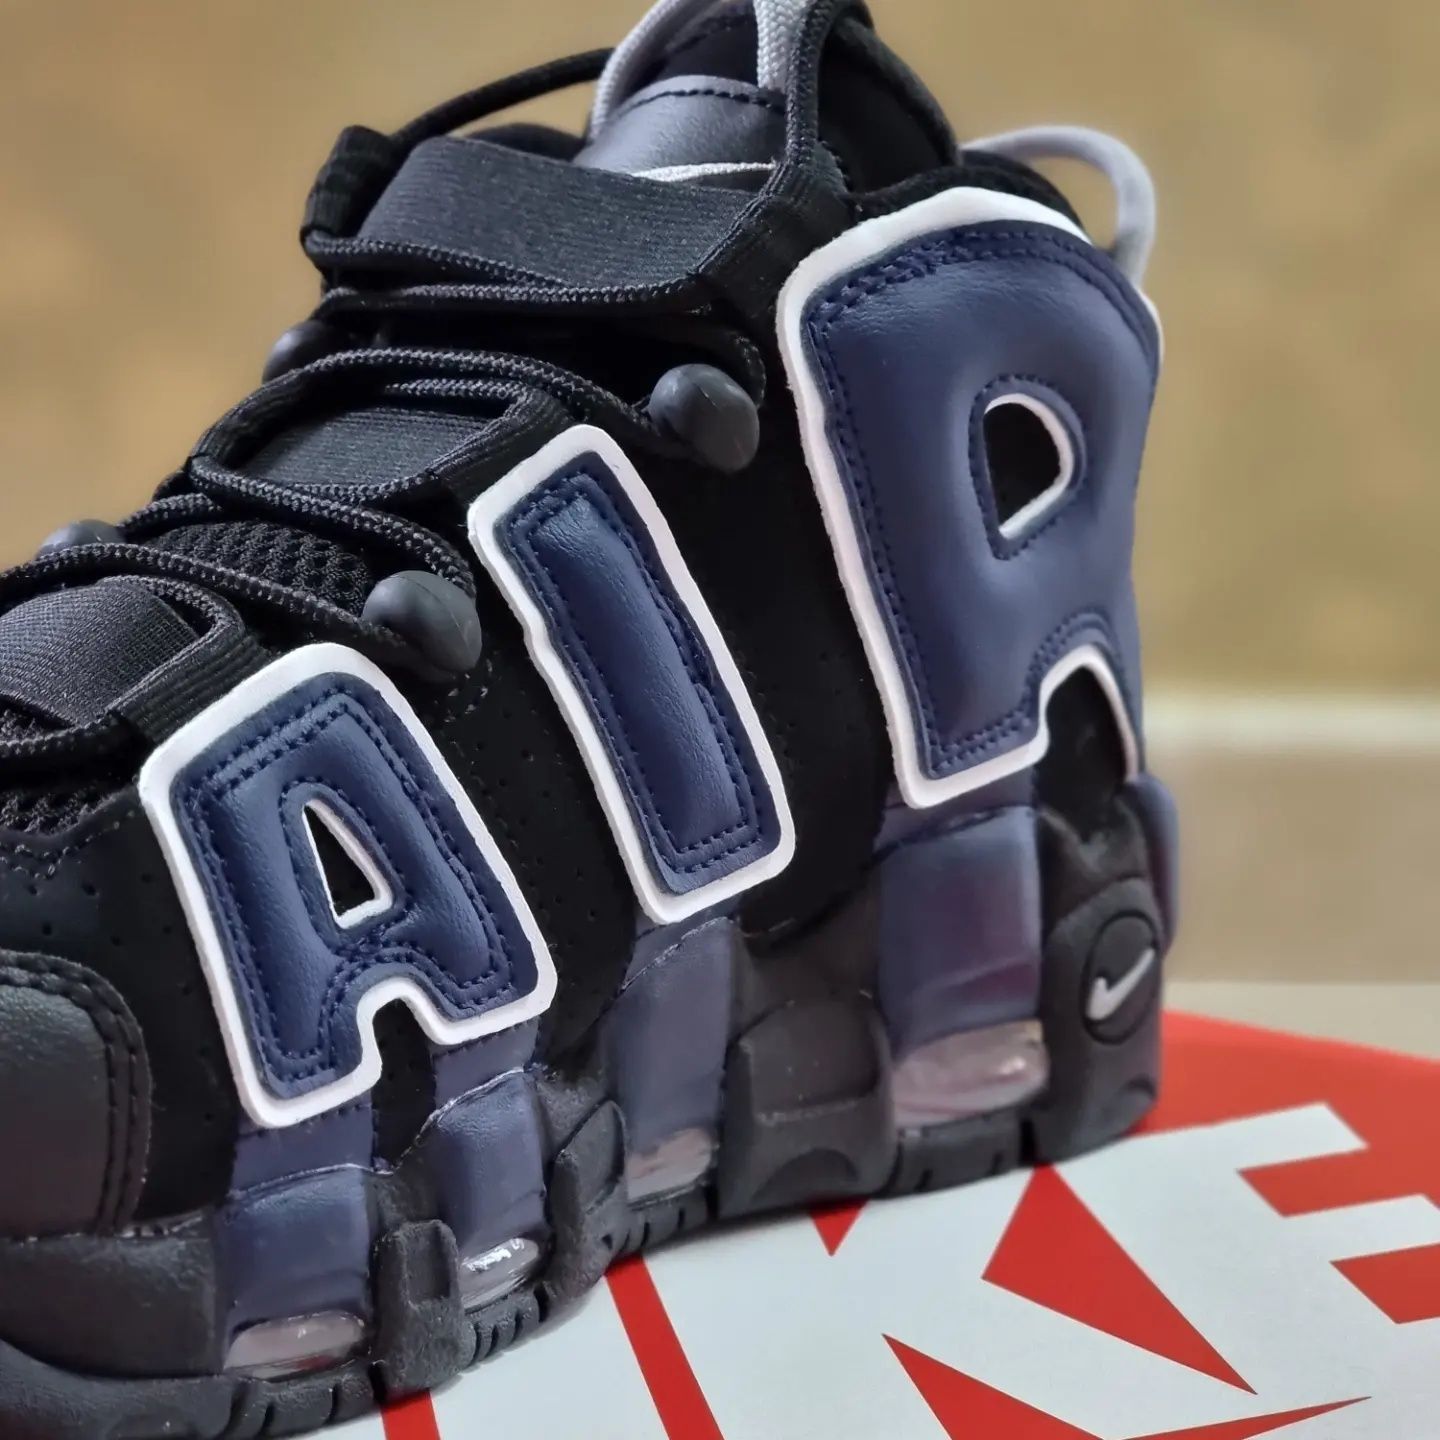 Nike Uptempo 96 Red/Blue